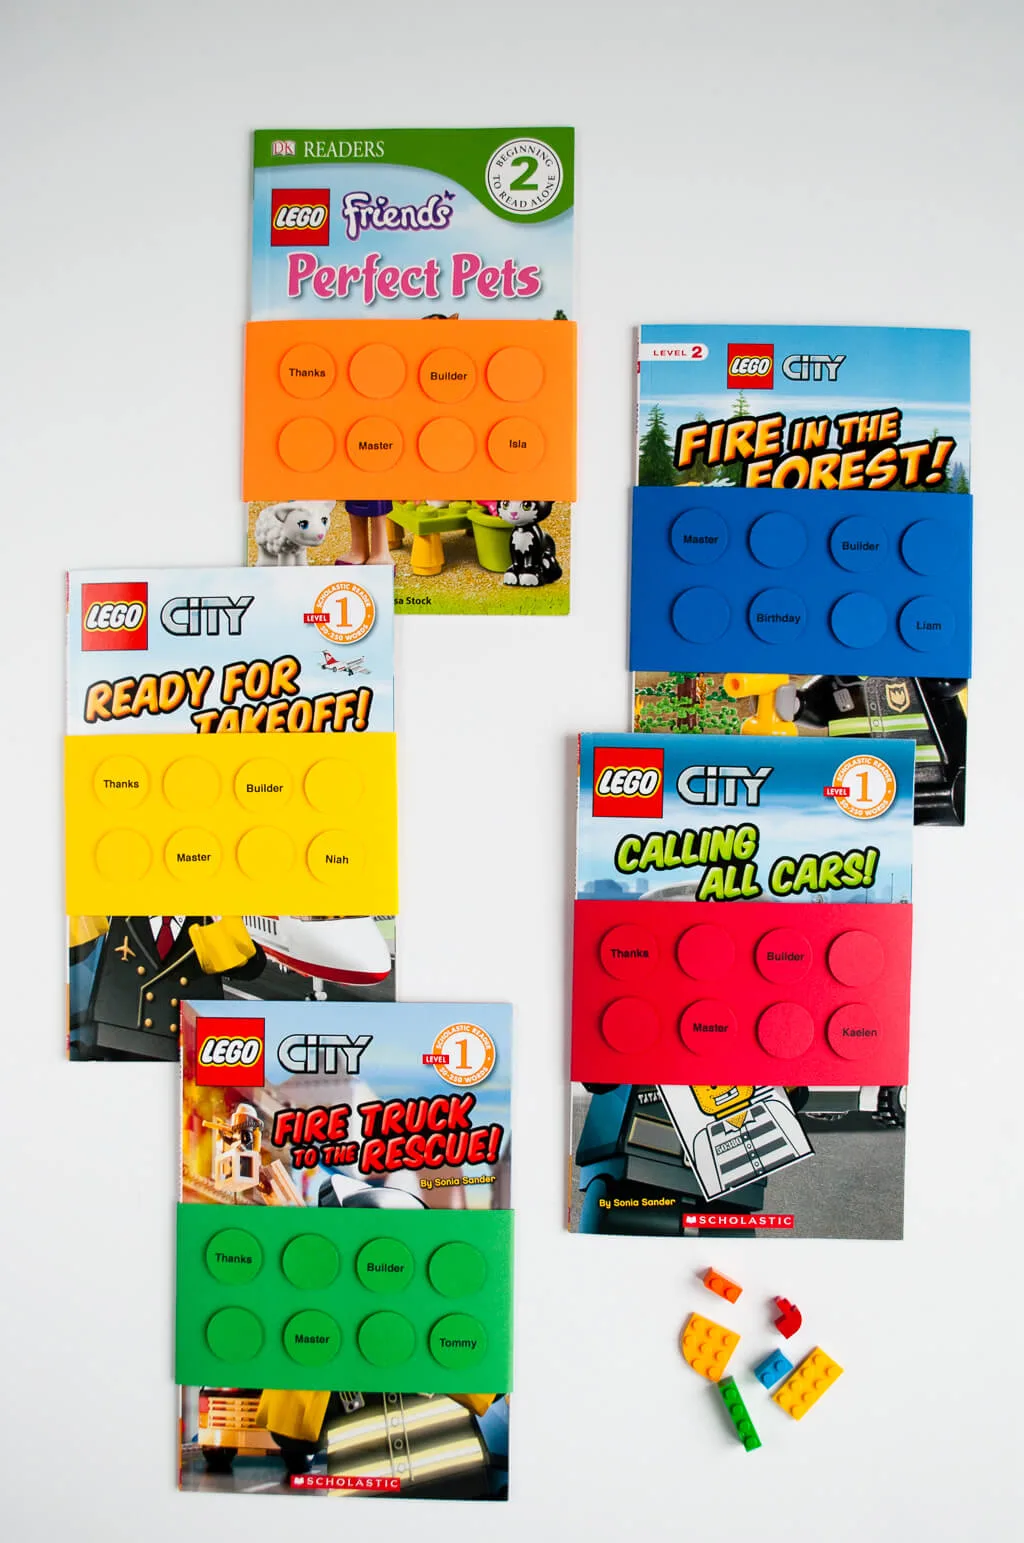 Easy DIY LEGO Birthday Party Favors: Wrap LEGO books with personalized paper LEGO brick book wraps using colored paper and a circle craft punch. It's an easy and useful LEGO birthday party favor idea! | LEGO birthday party favor | LEGO goodie bag idea